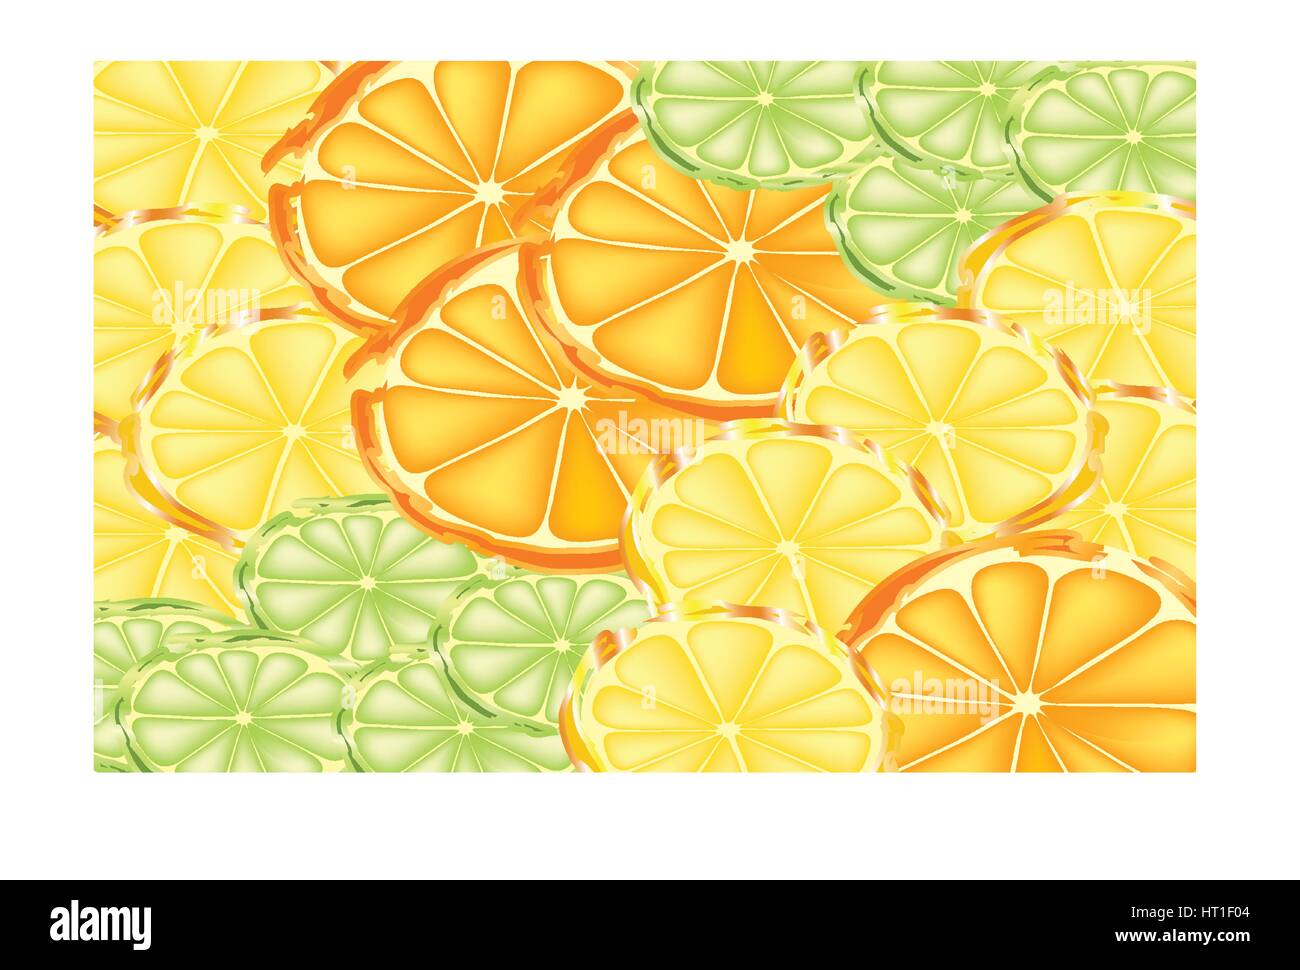 Slices of oranges, lemons, and limes Stock Vector